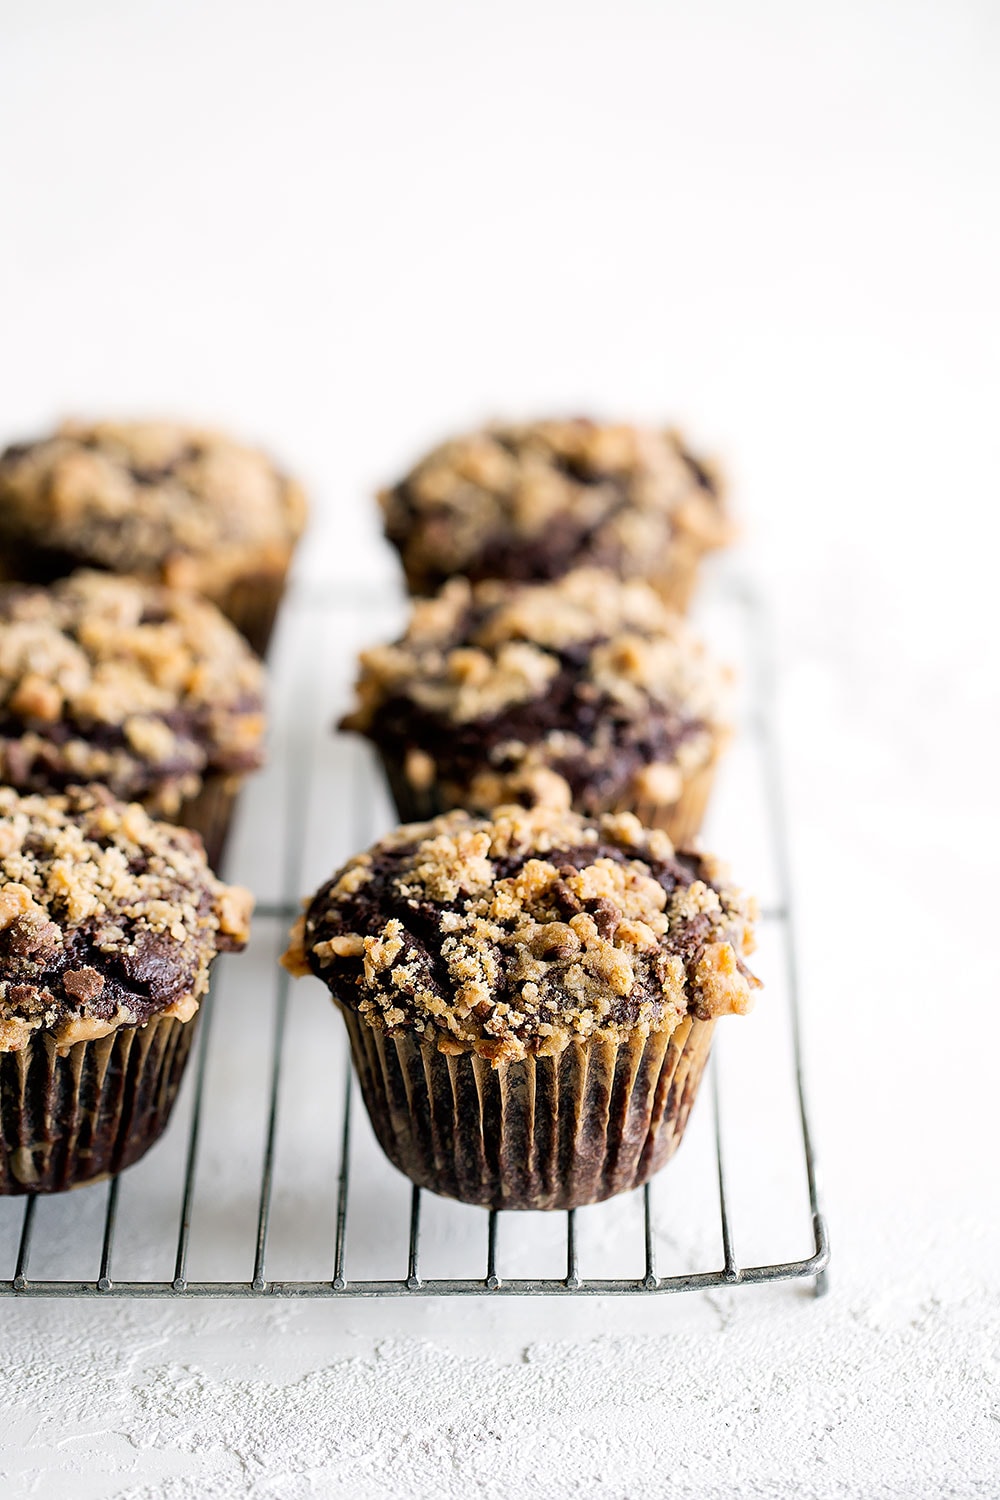 Chocolate Coffee Toffee Crunch Muffins feature a mocha muffin base that's studded with chocolate chips and topped with a crunchy toffee streusel for the best combination of flavor and texture!